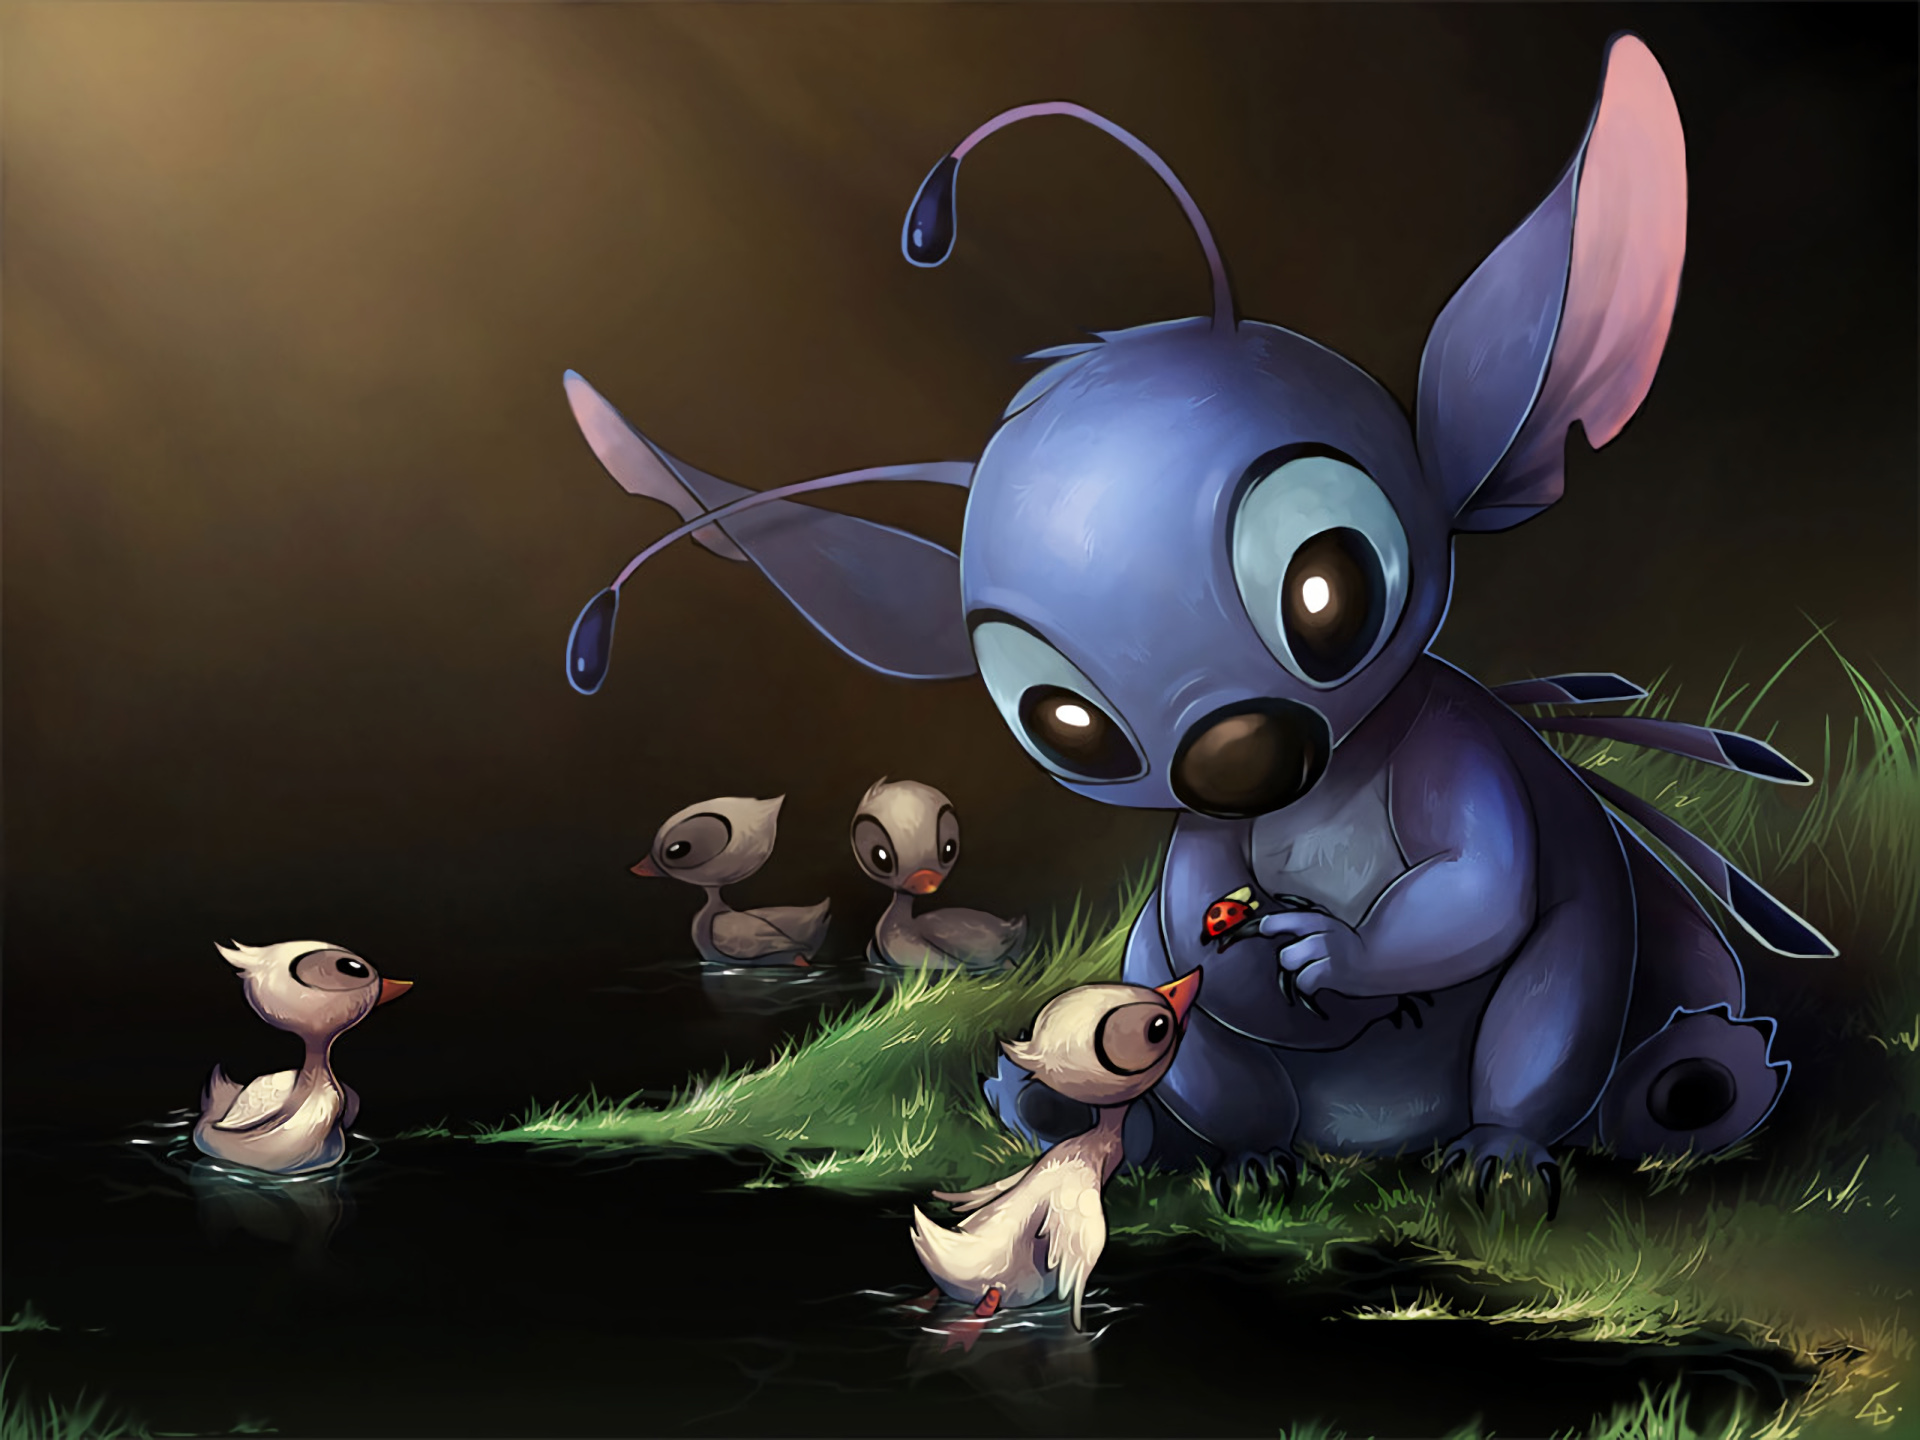 Lilo and Stitch: The Series, HD wallpapers, Vibrant backgrounds, Movie magic, 1920x1440 HD Desktop